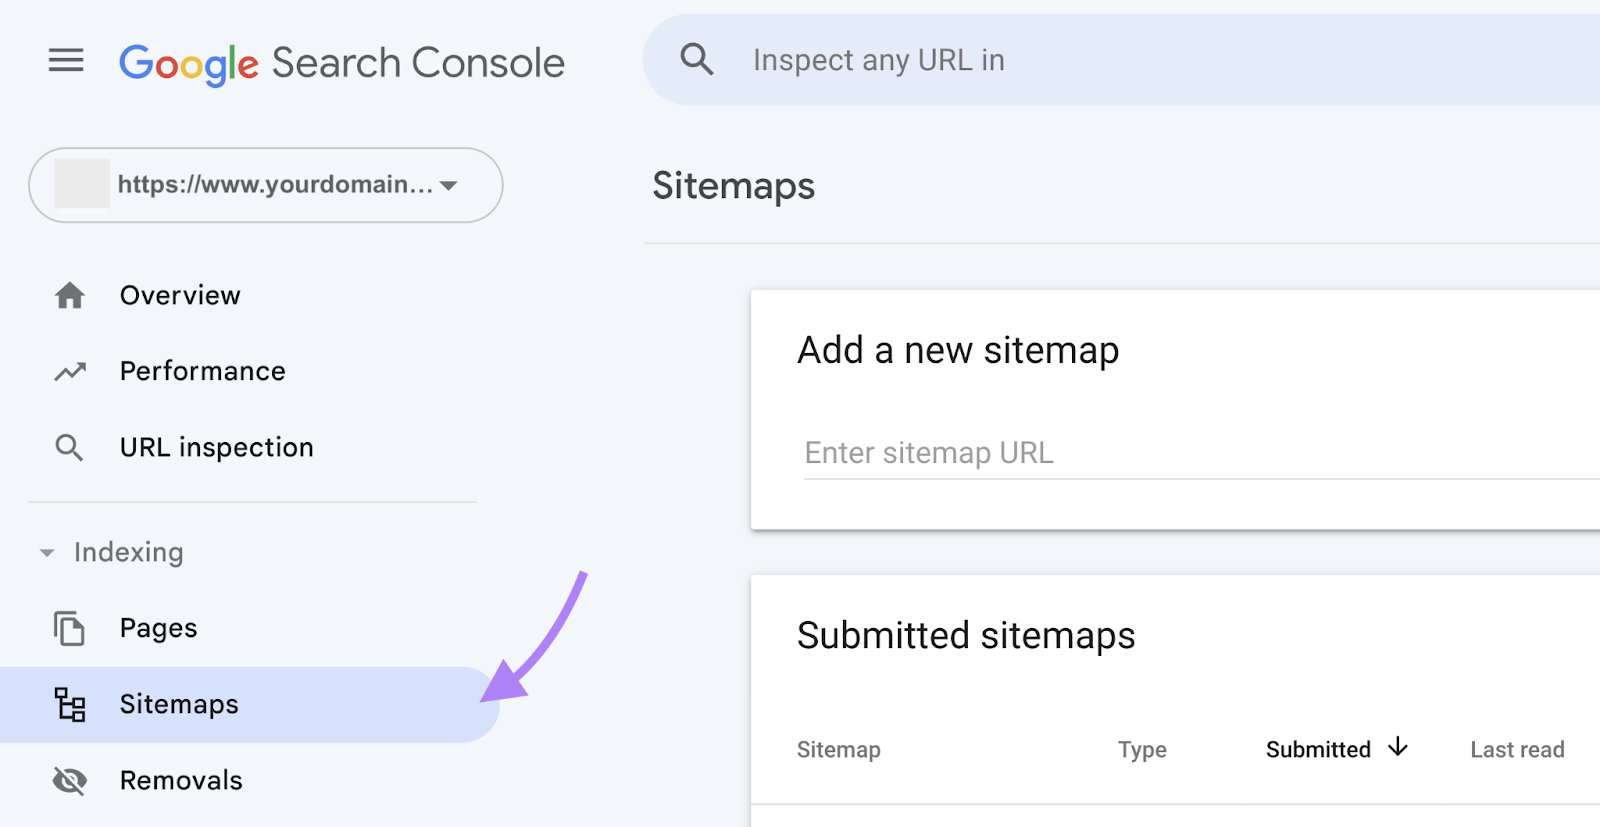 “Sitemaps” highlighted in the left-hand navigation